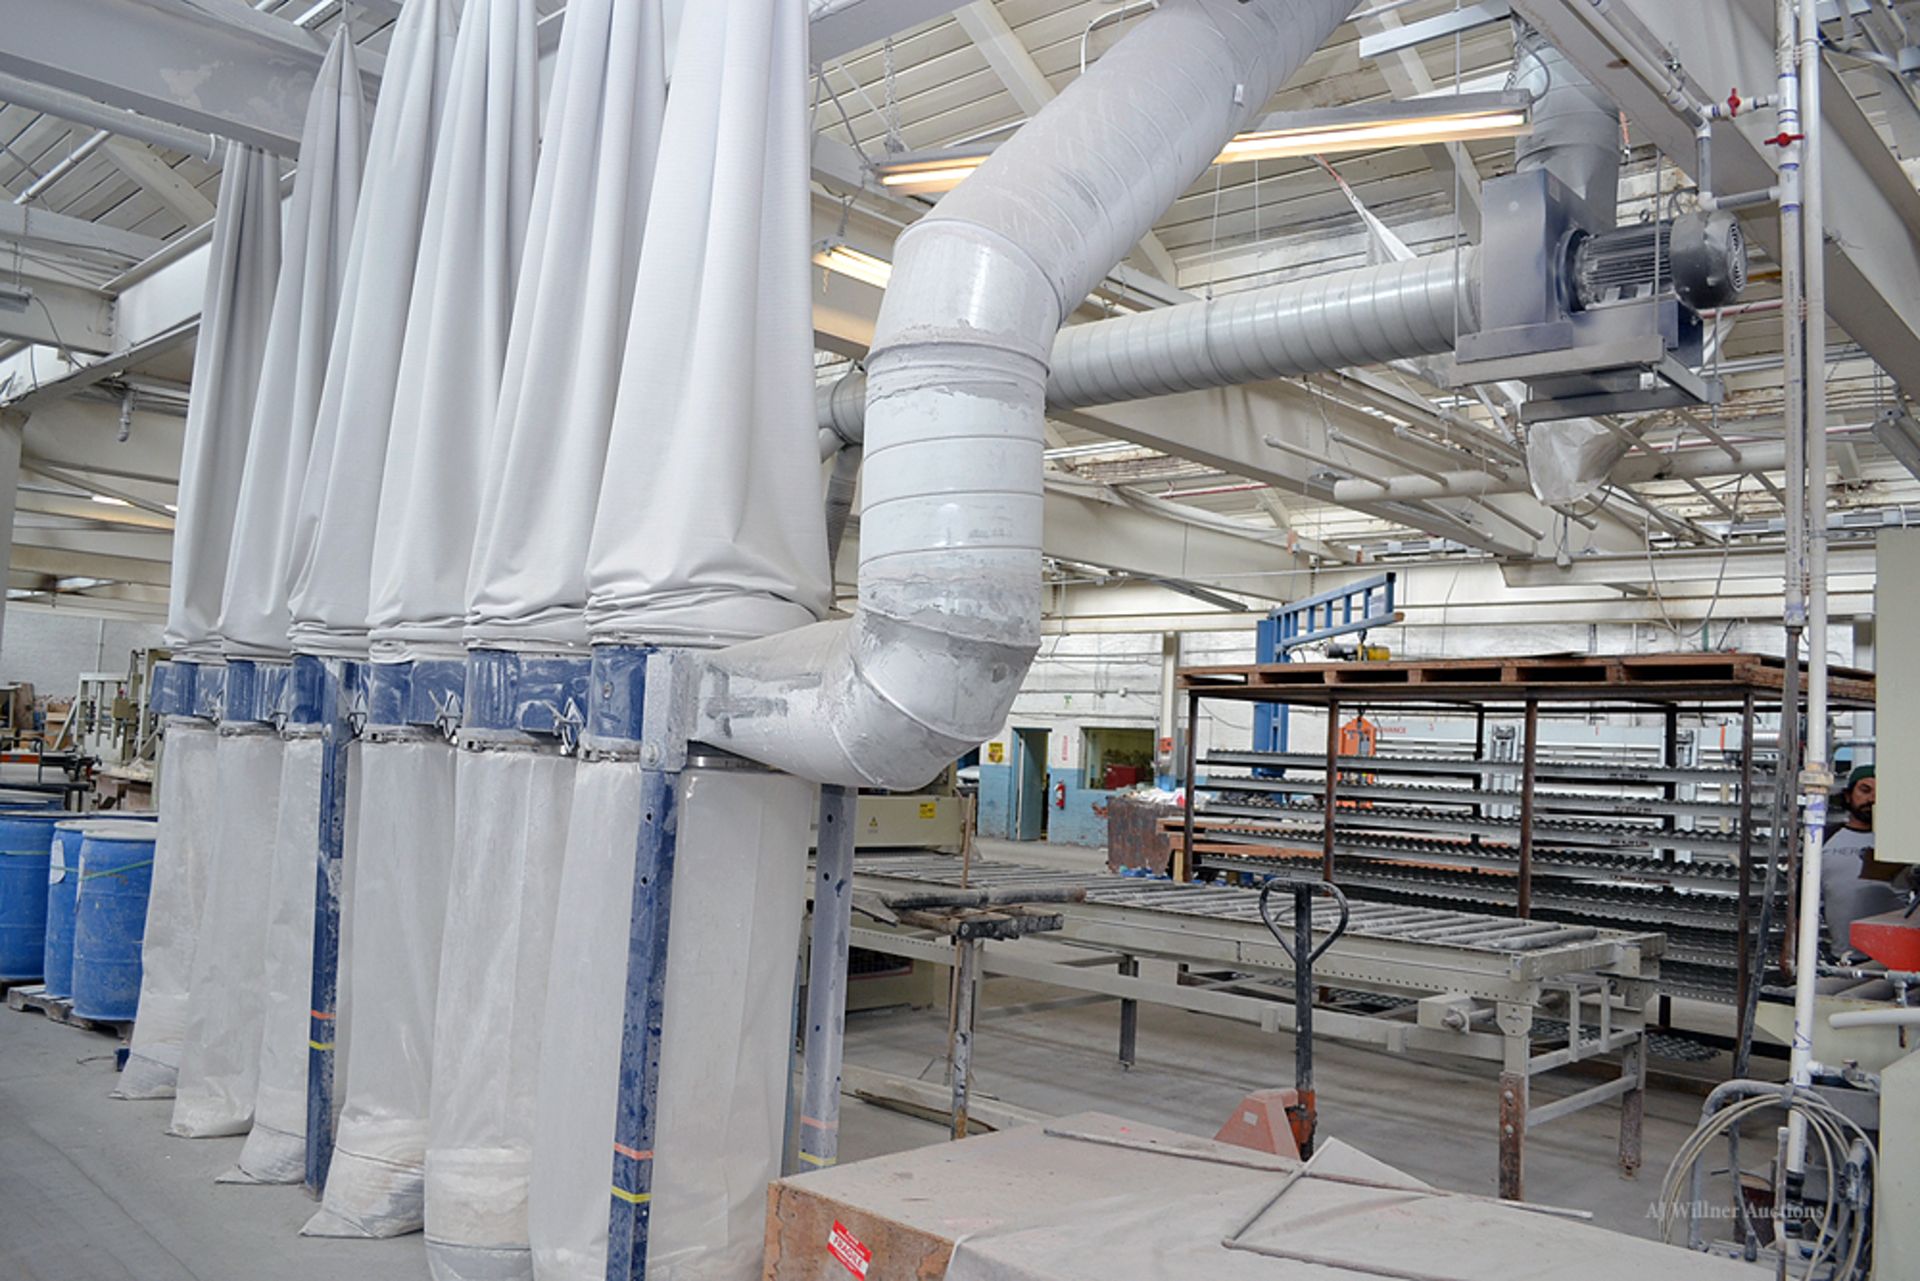 6-Bag Dust Collection System w/ Ceiling Mounted Motor & Duct Work - Image 5 of 5